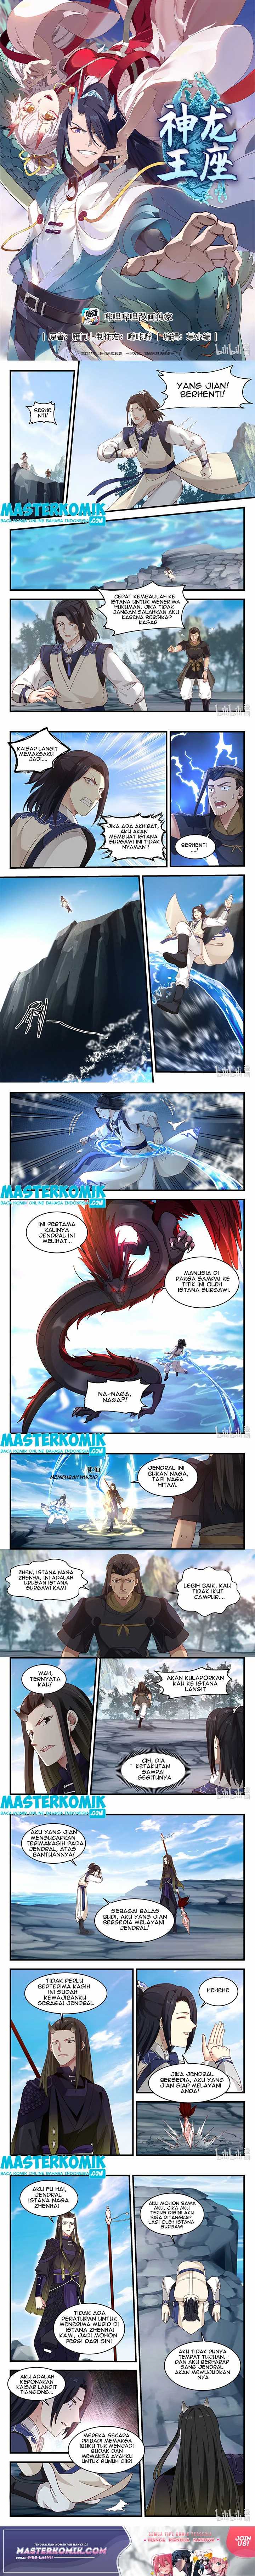 Dragon Throne Chapter 43